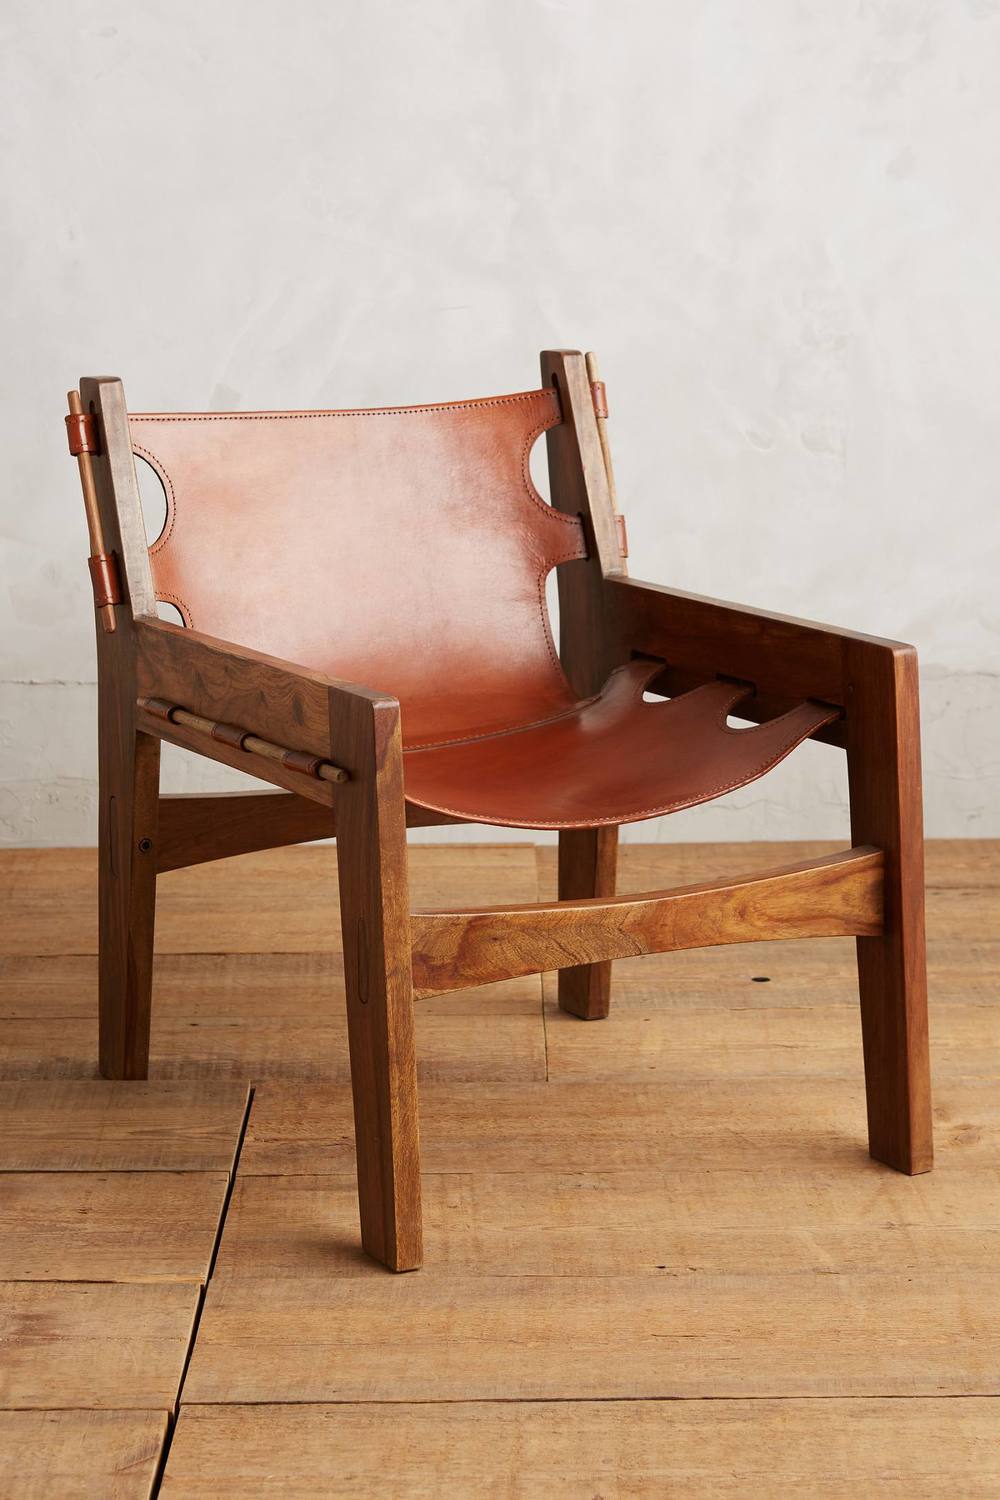 OF THE MOMENT THE LEATHER SLING CHAIR —